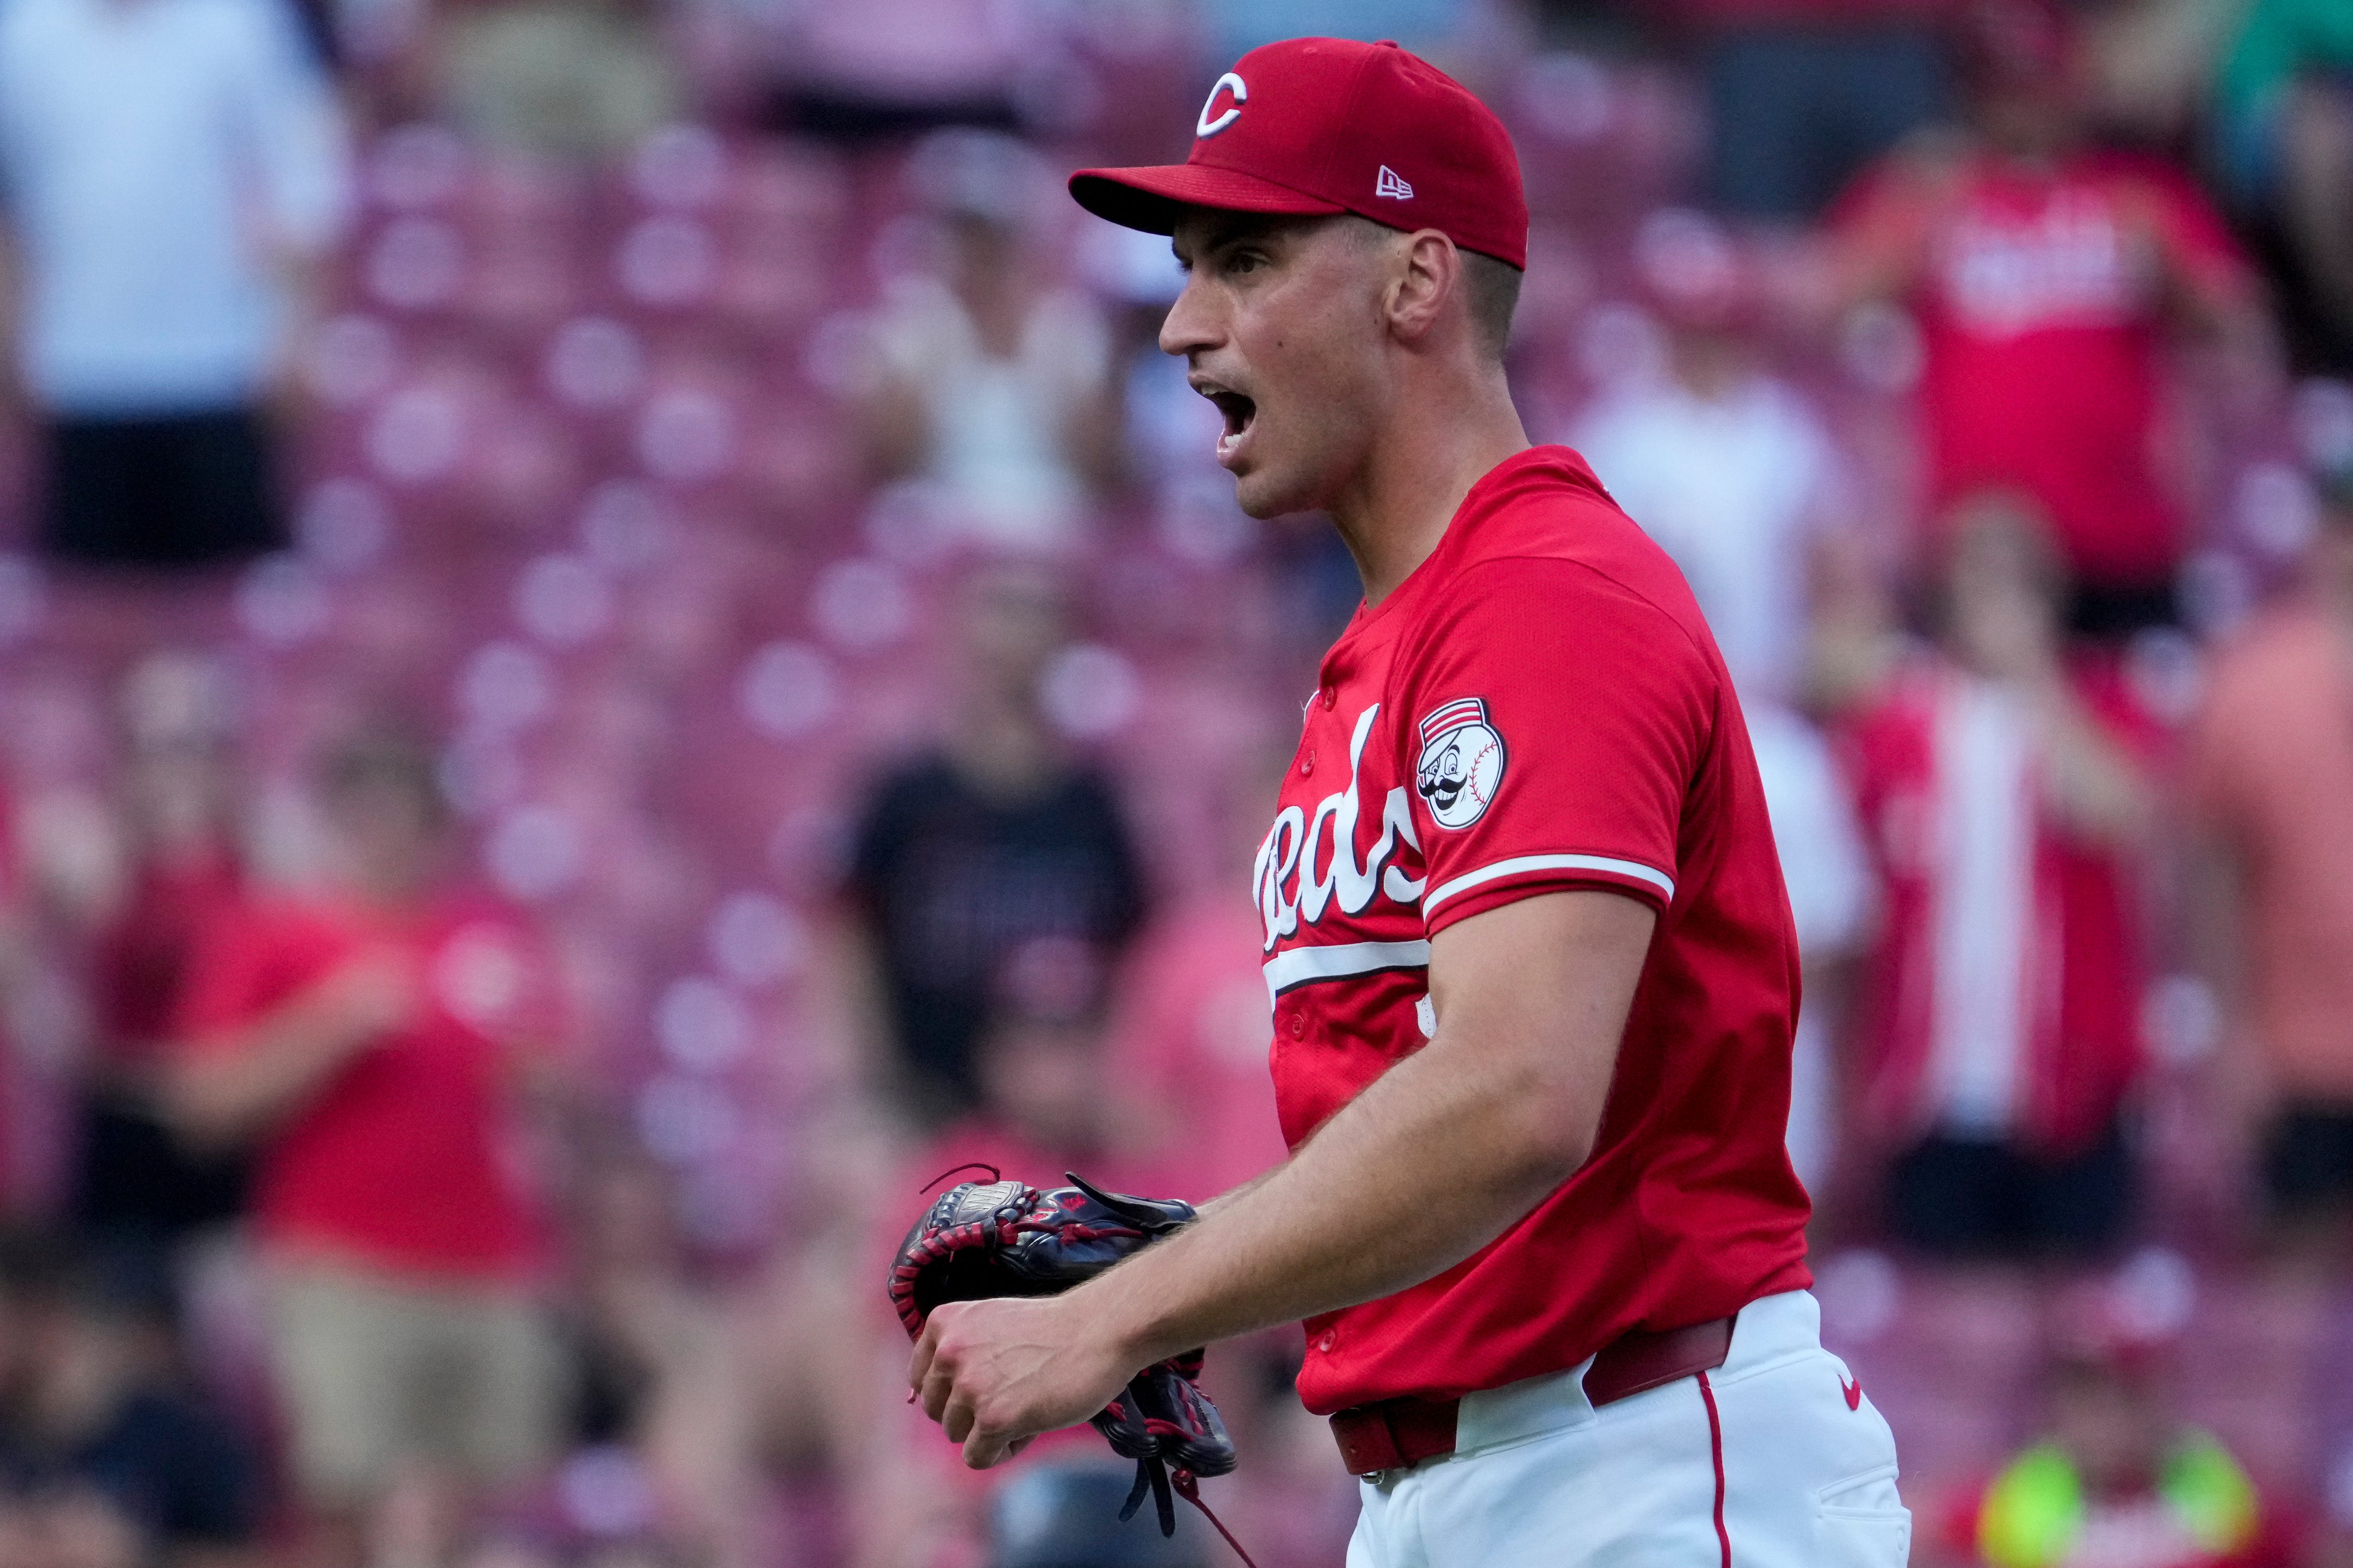 Cincinnati Reds reliever Brent Suter to IL with lat tear